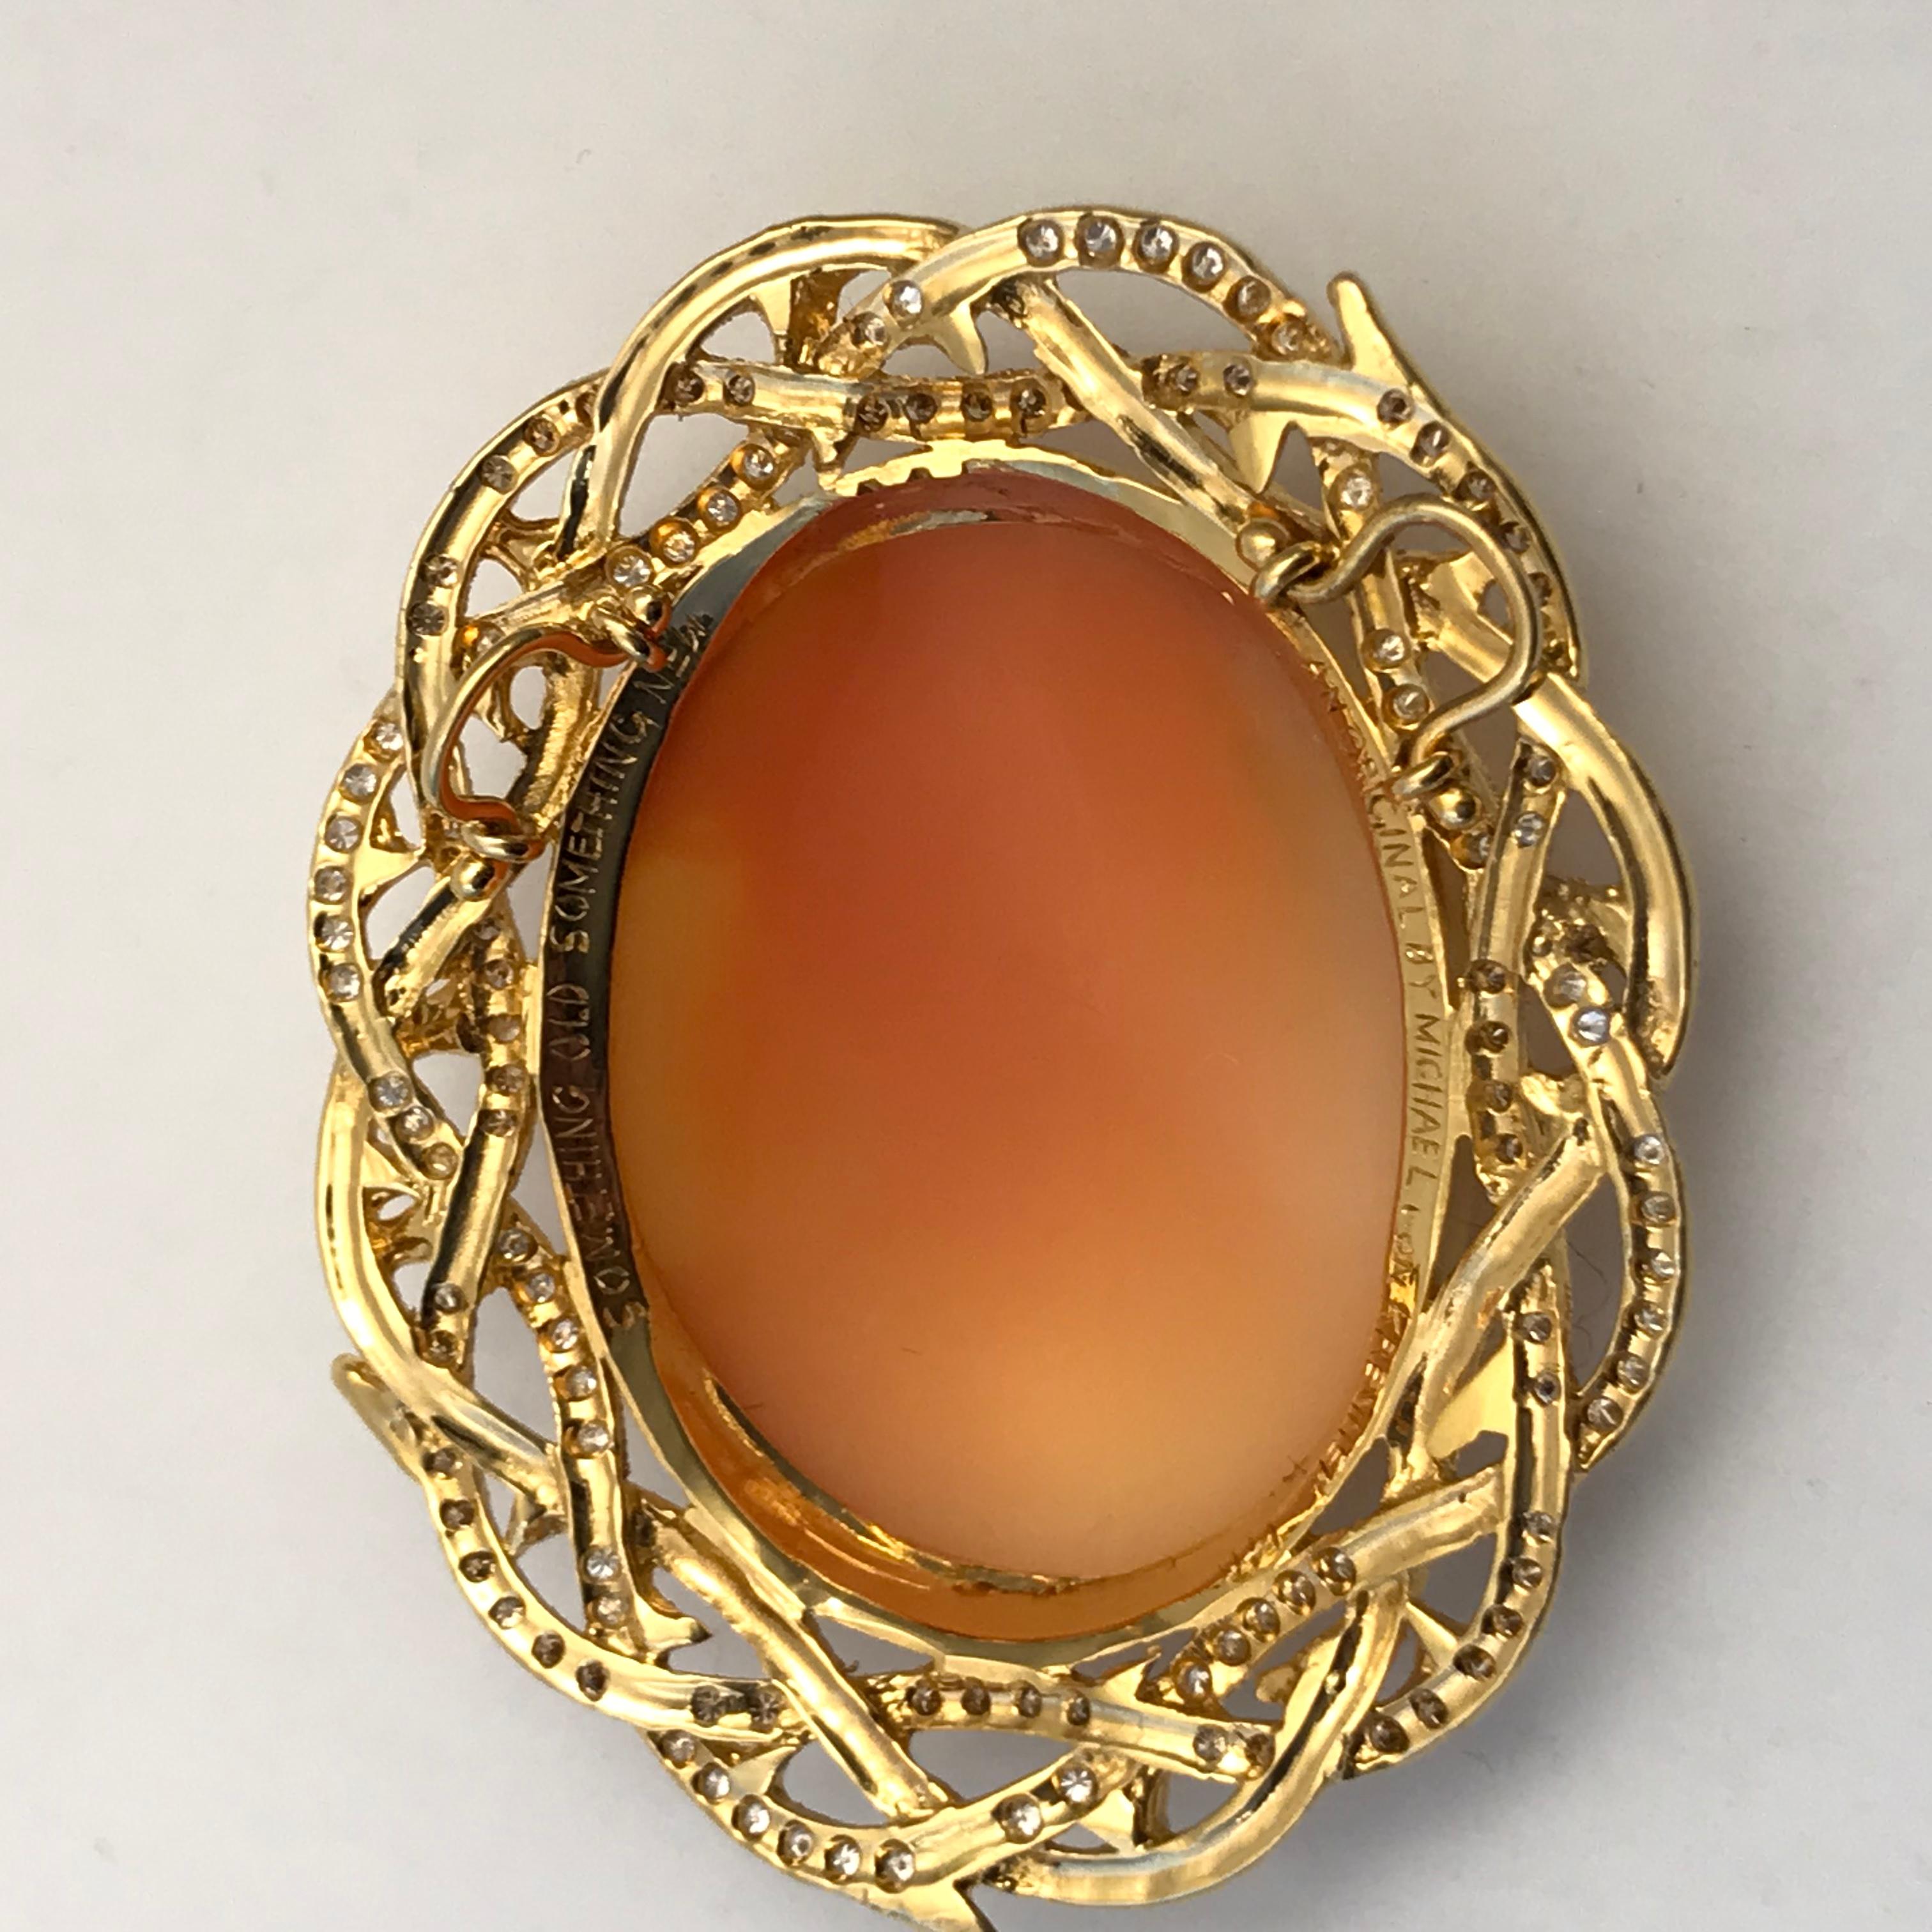 Cameo 1890s Jesus Set in 14 Karat Gold with Diamonds, Rubies and Brown Diamonds For Sale 8